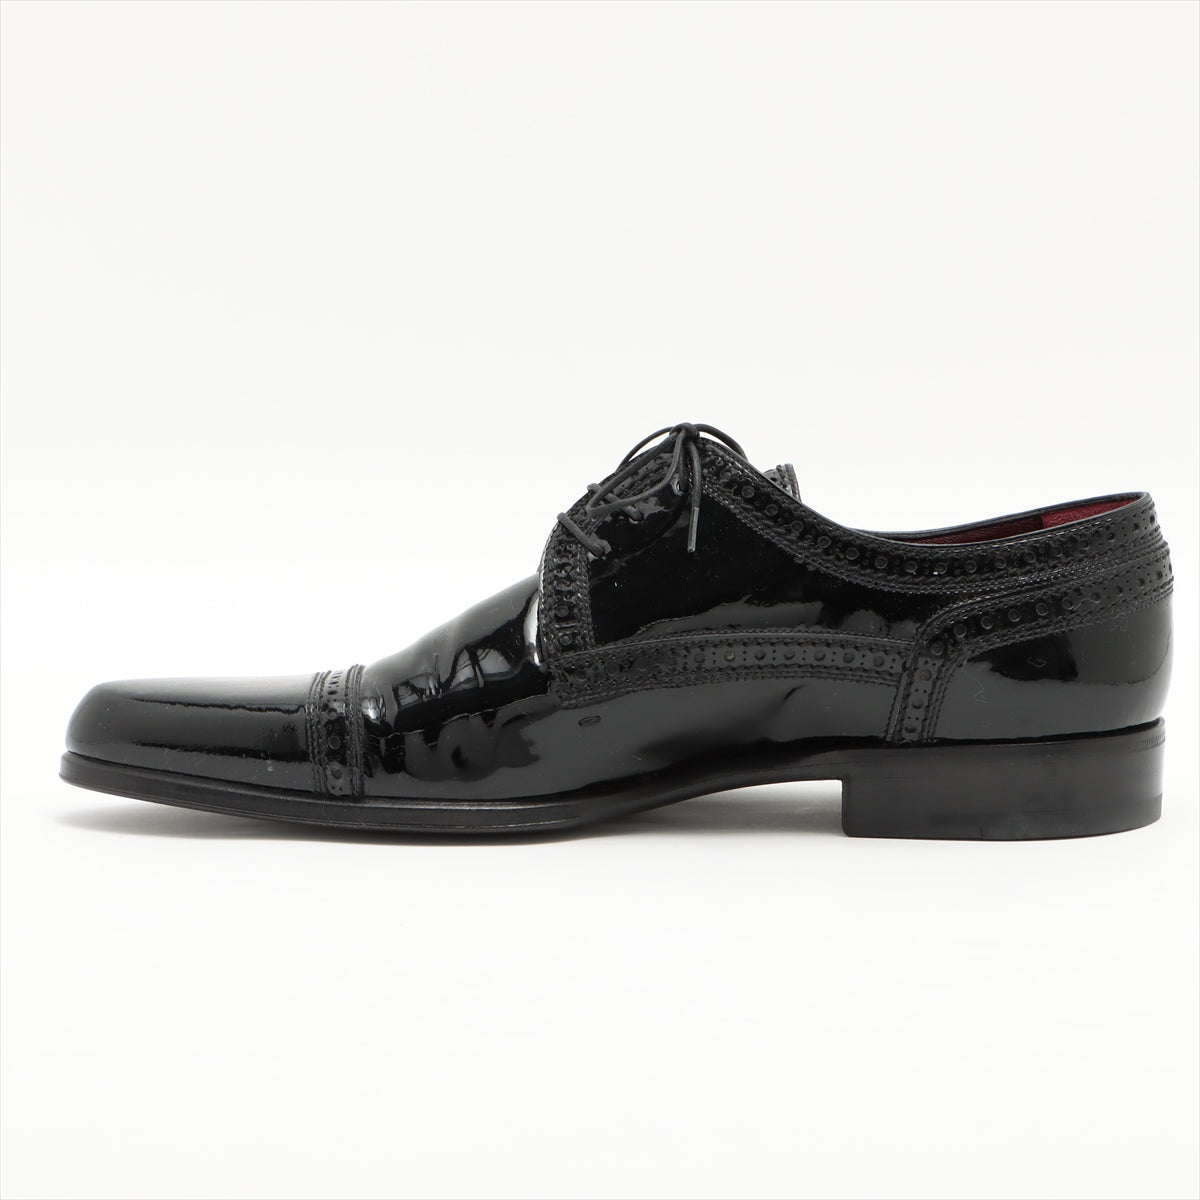 Louis Vuitton 08 Patent leather Leather shoes 10 Men's Black NI0028 There is stickiness